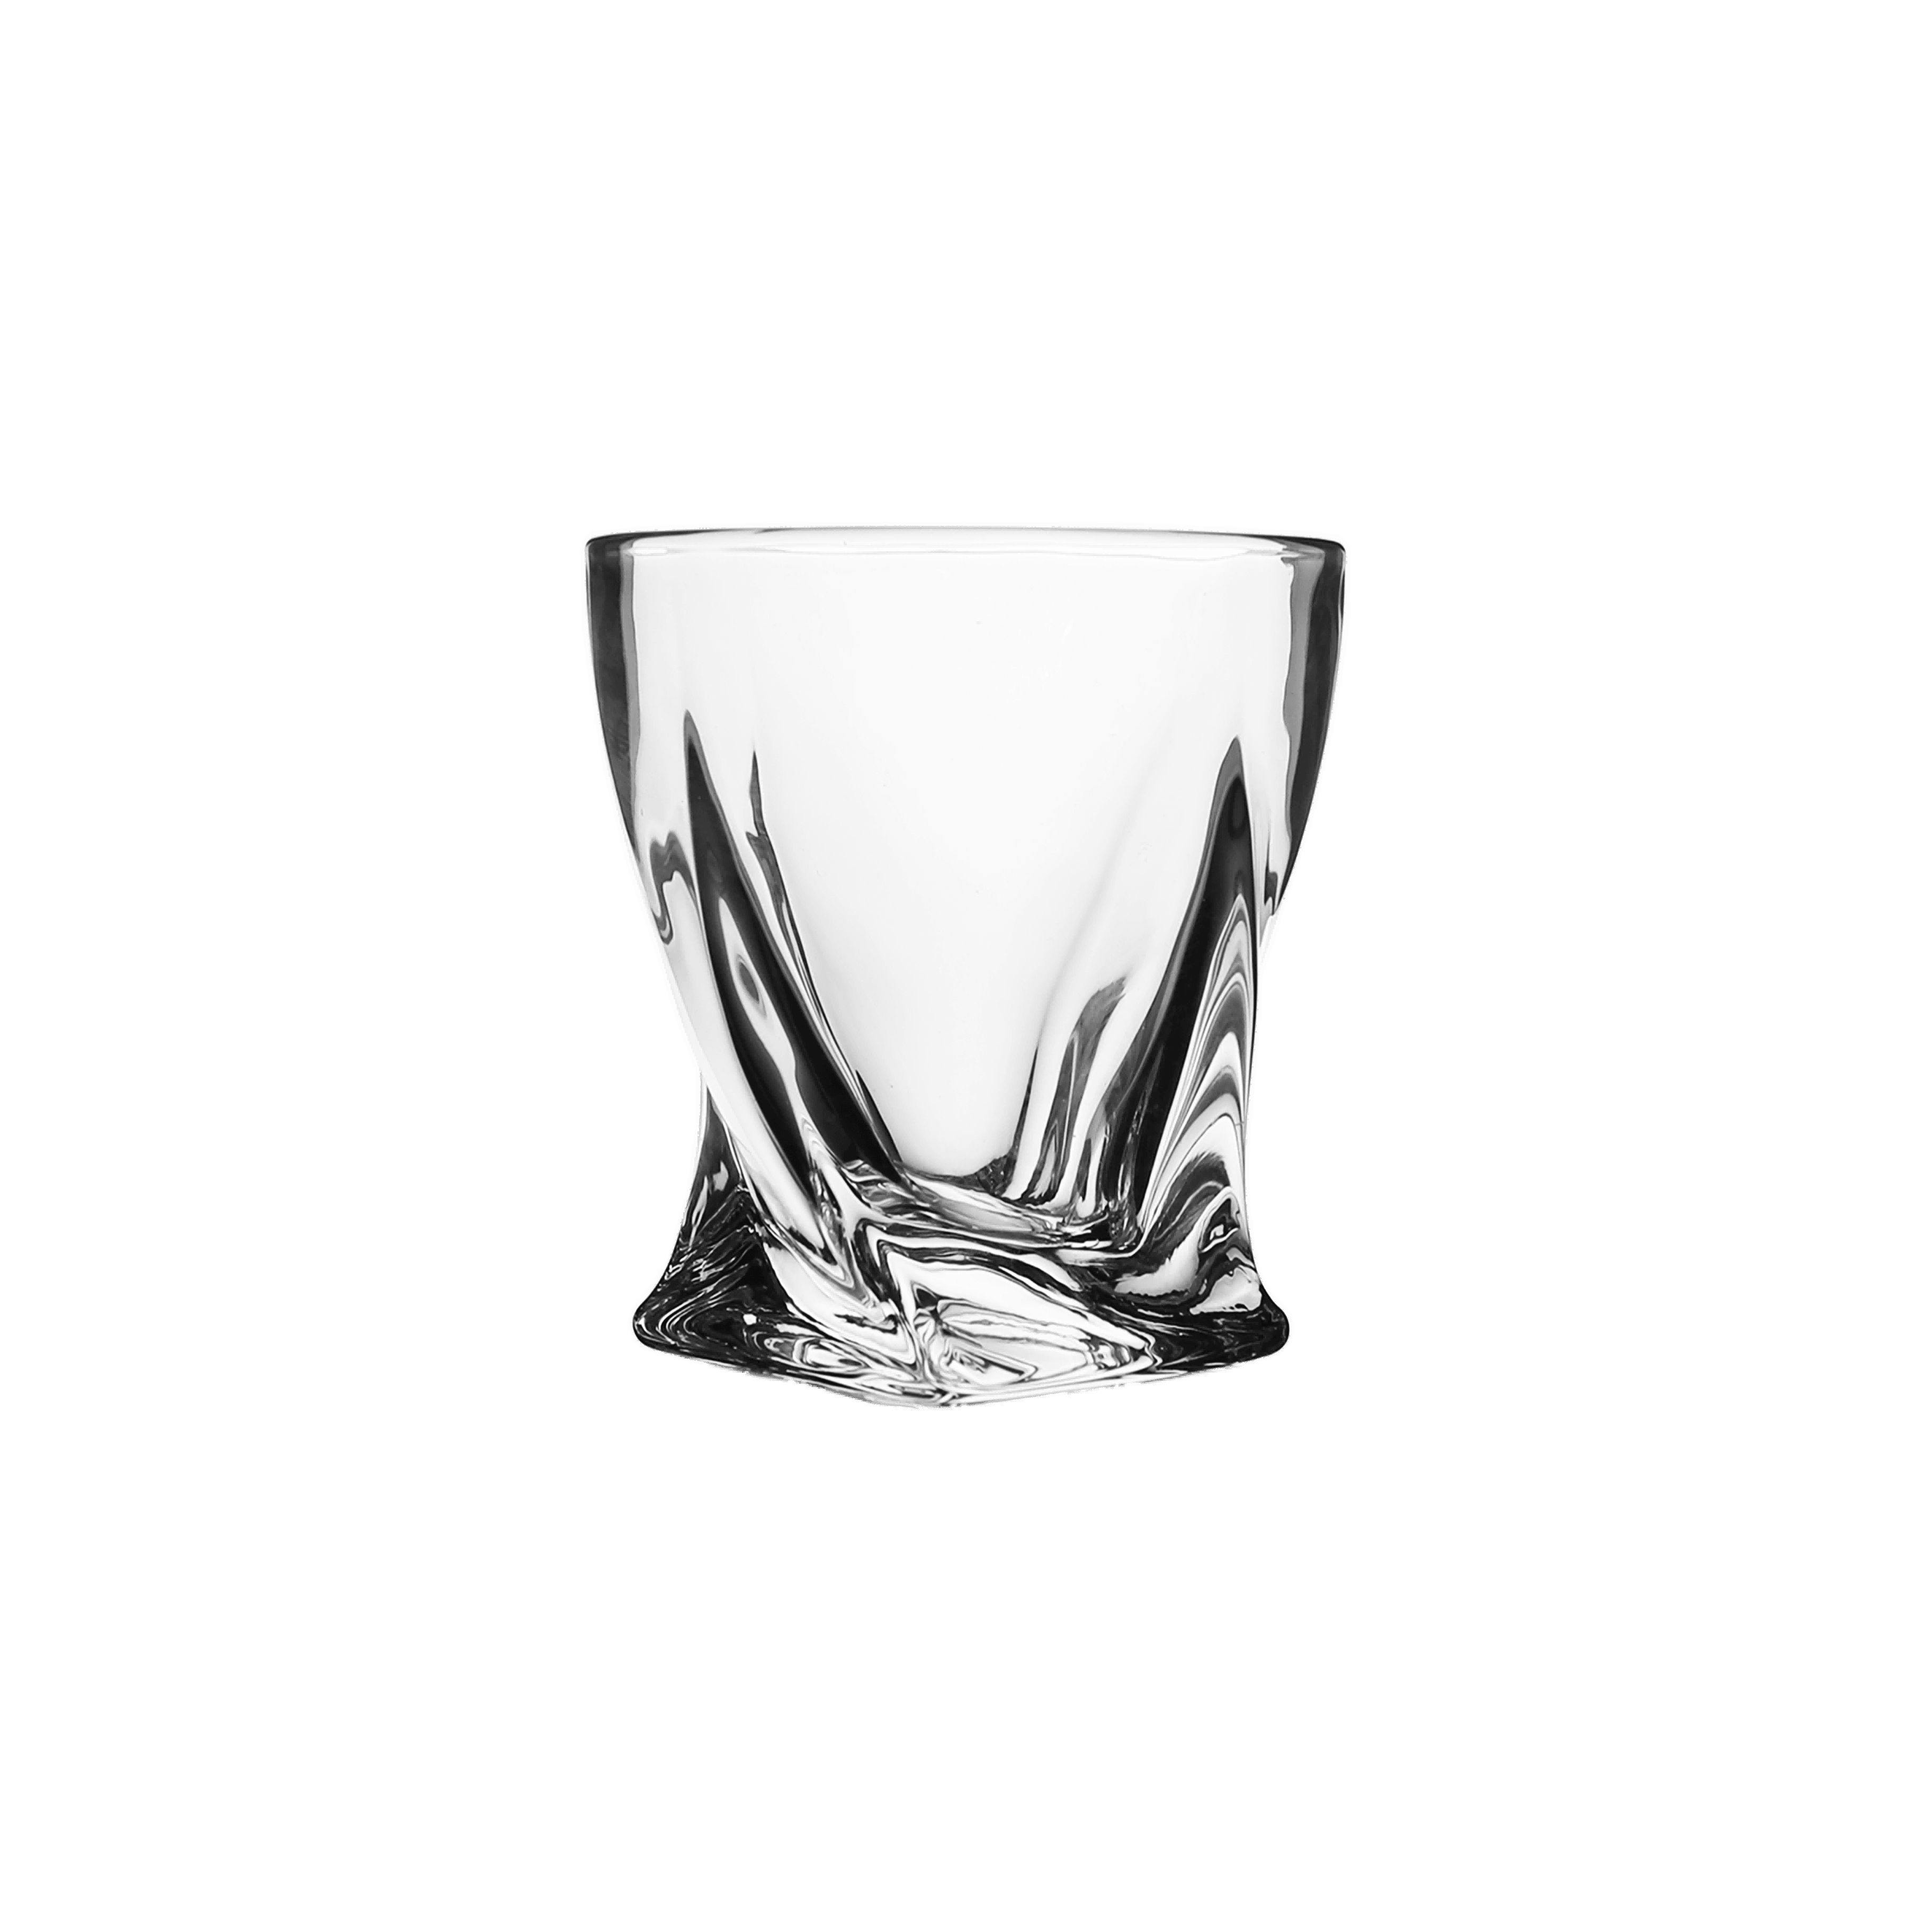 Abstract Design Crystal Decanter Set of 6 Cups - Elegant Linen